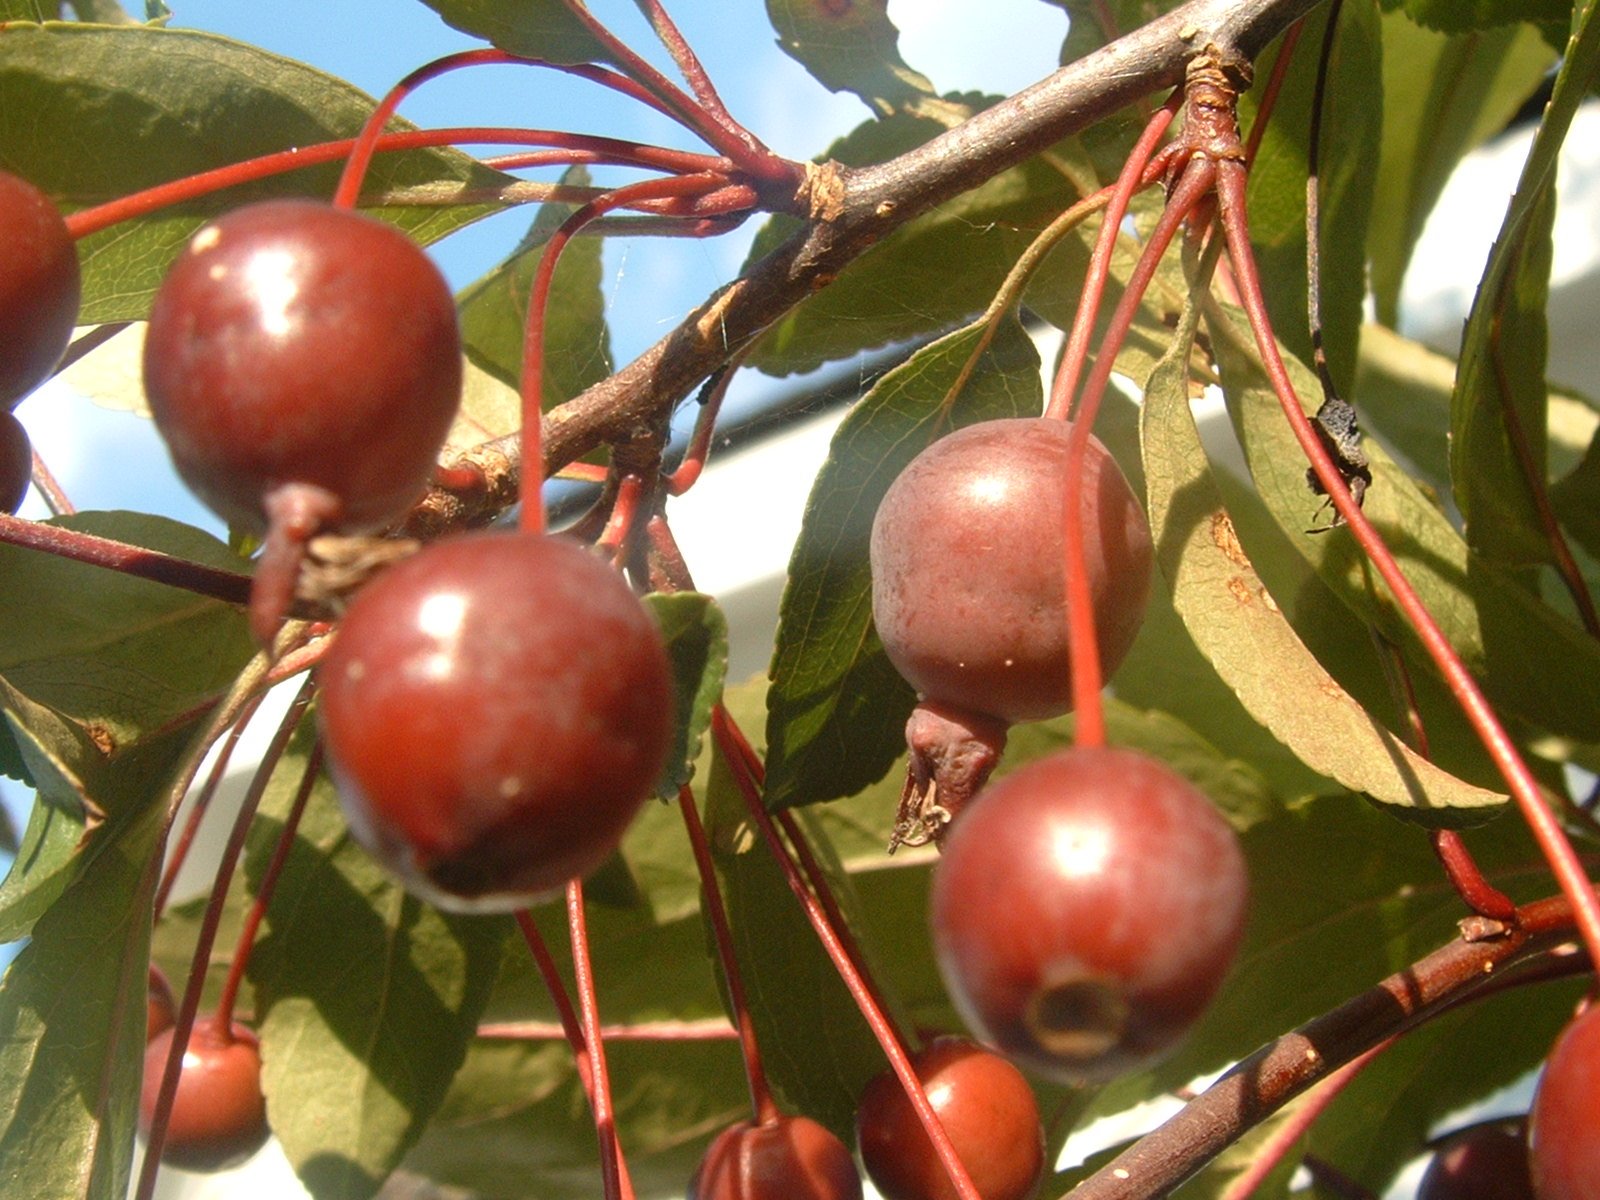 berries growing on tree nches with leaves and fruit